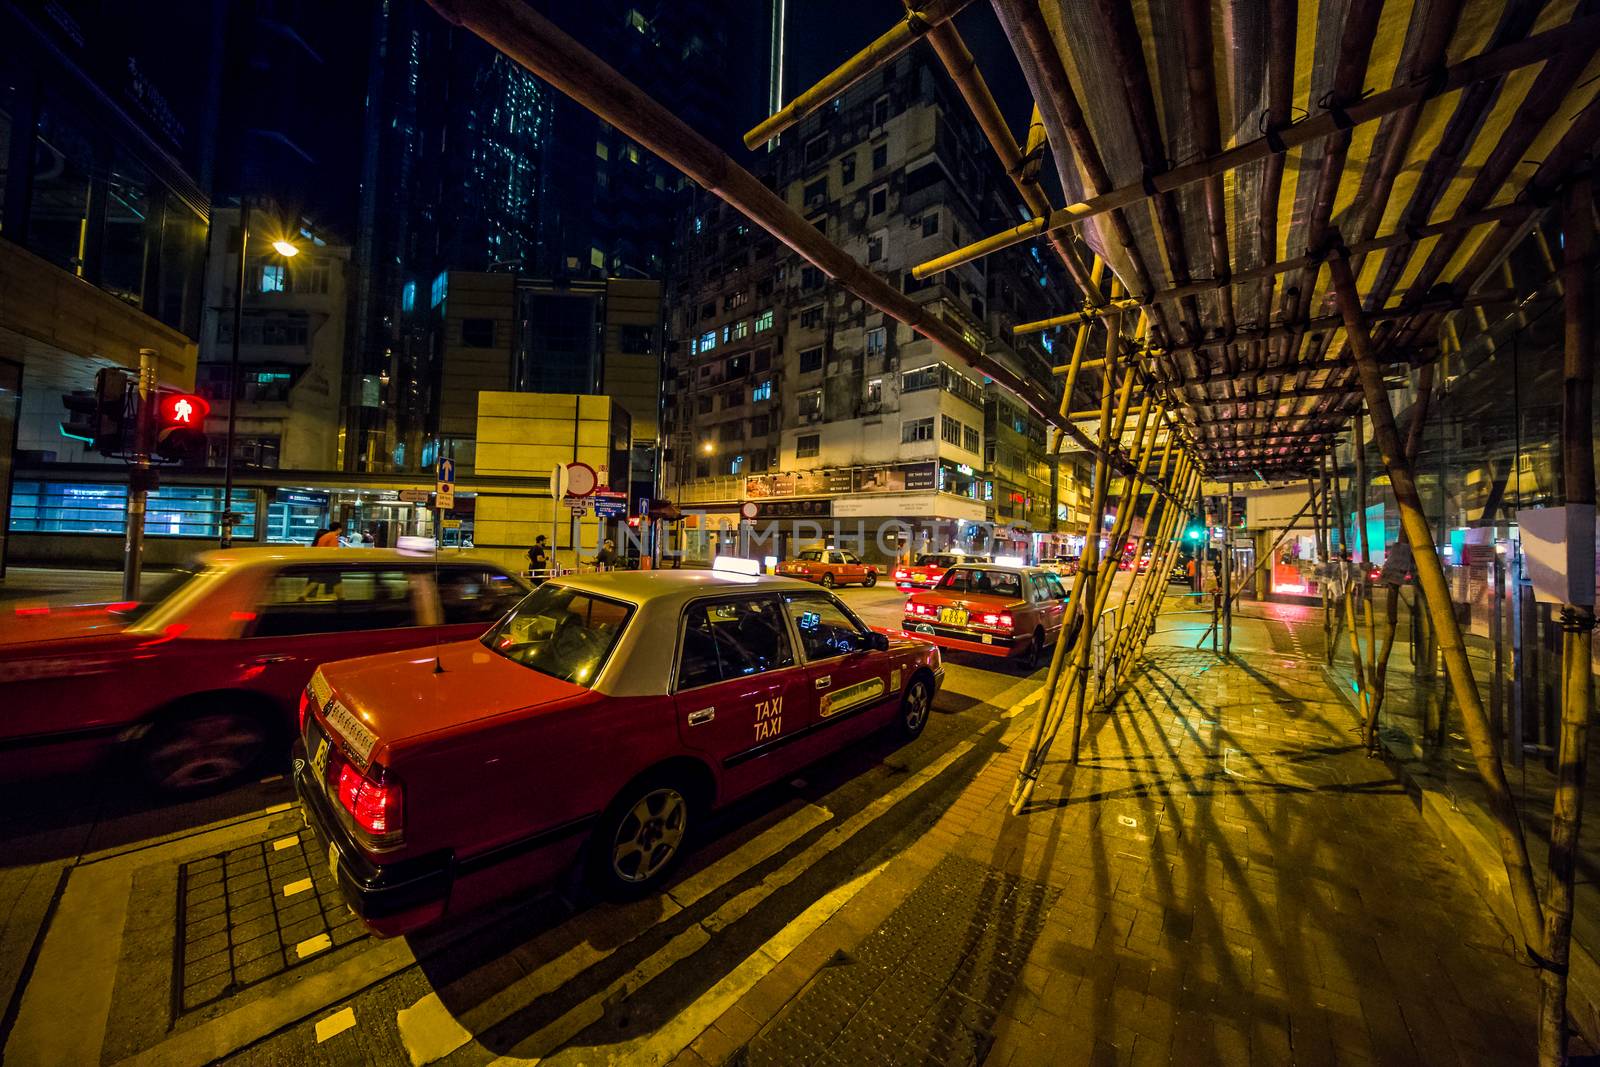 Red taxis at late night at an intersection in Hong Kong